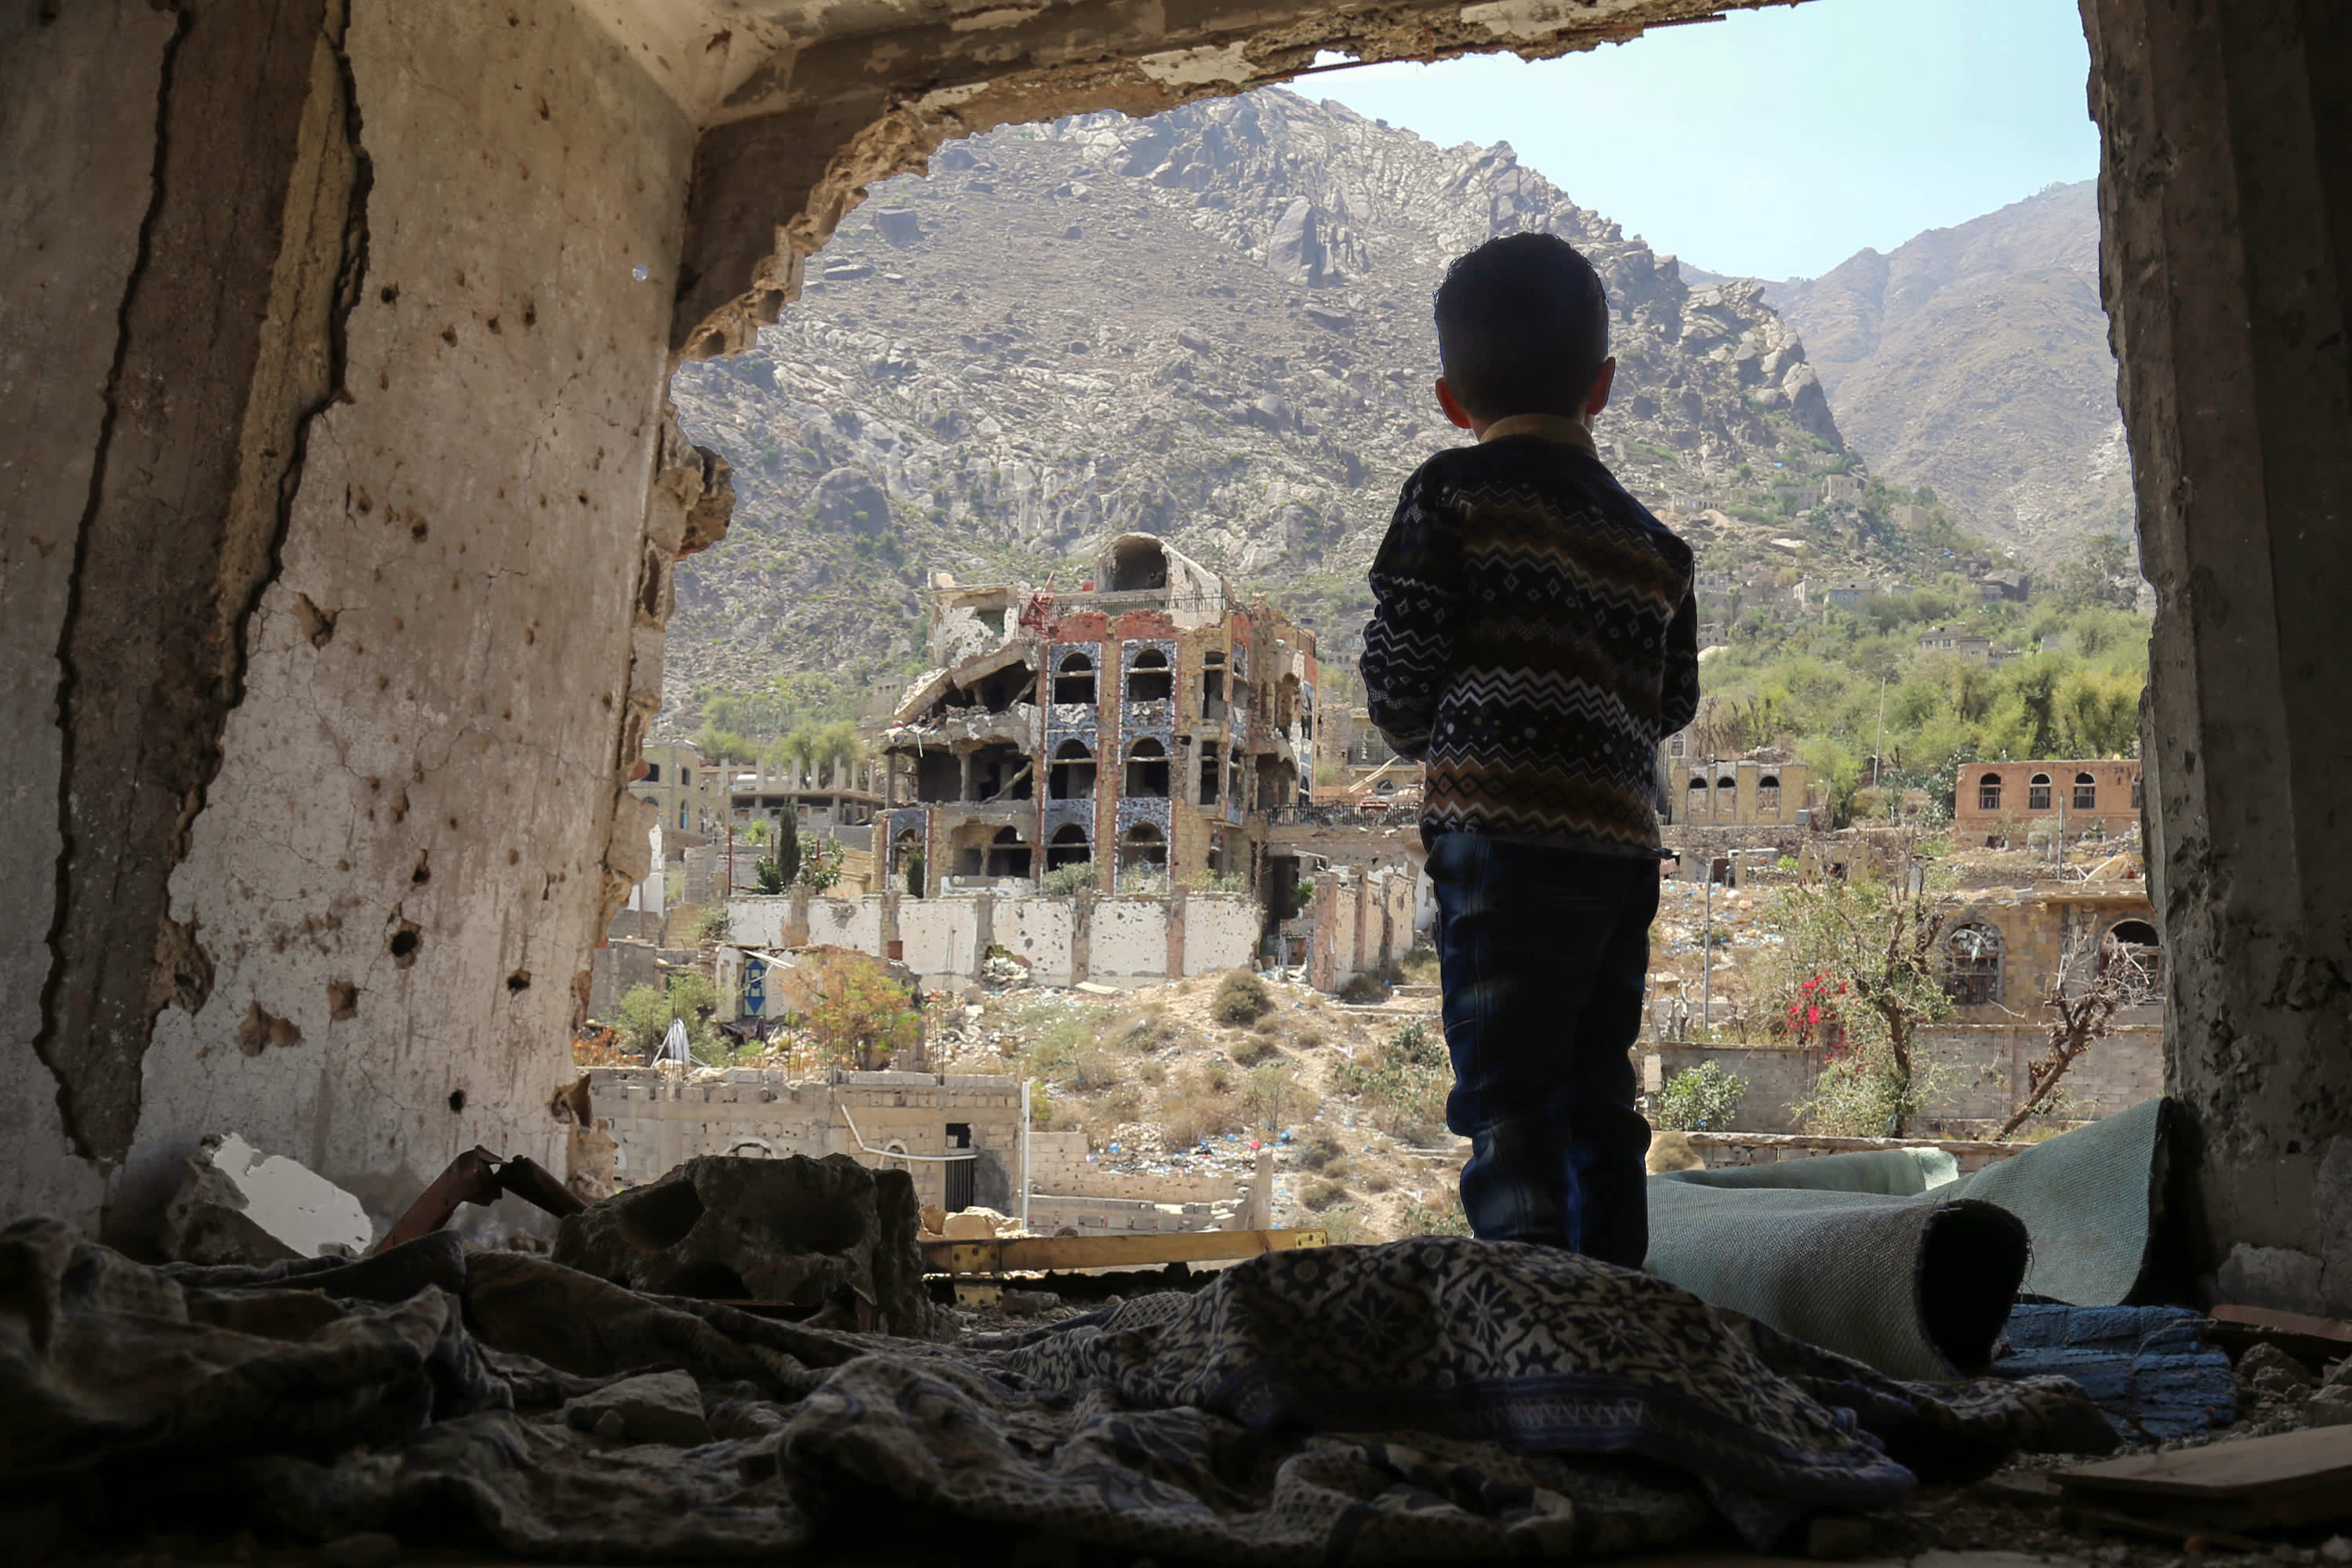 Saudi Arabia proposes ceasefire in Yemen as the war drags on